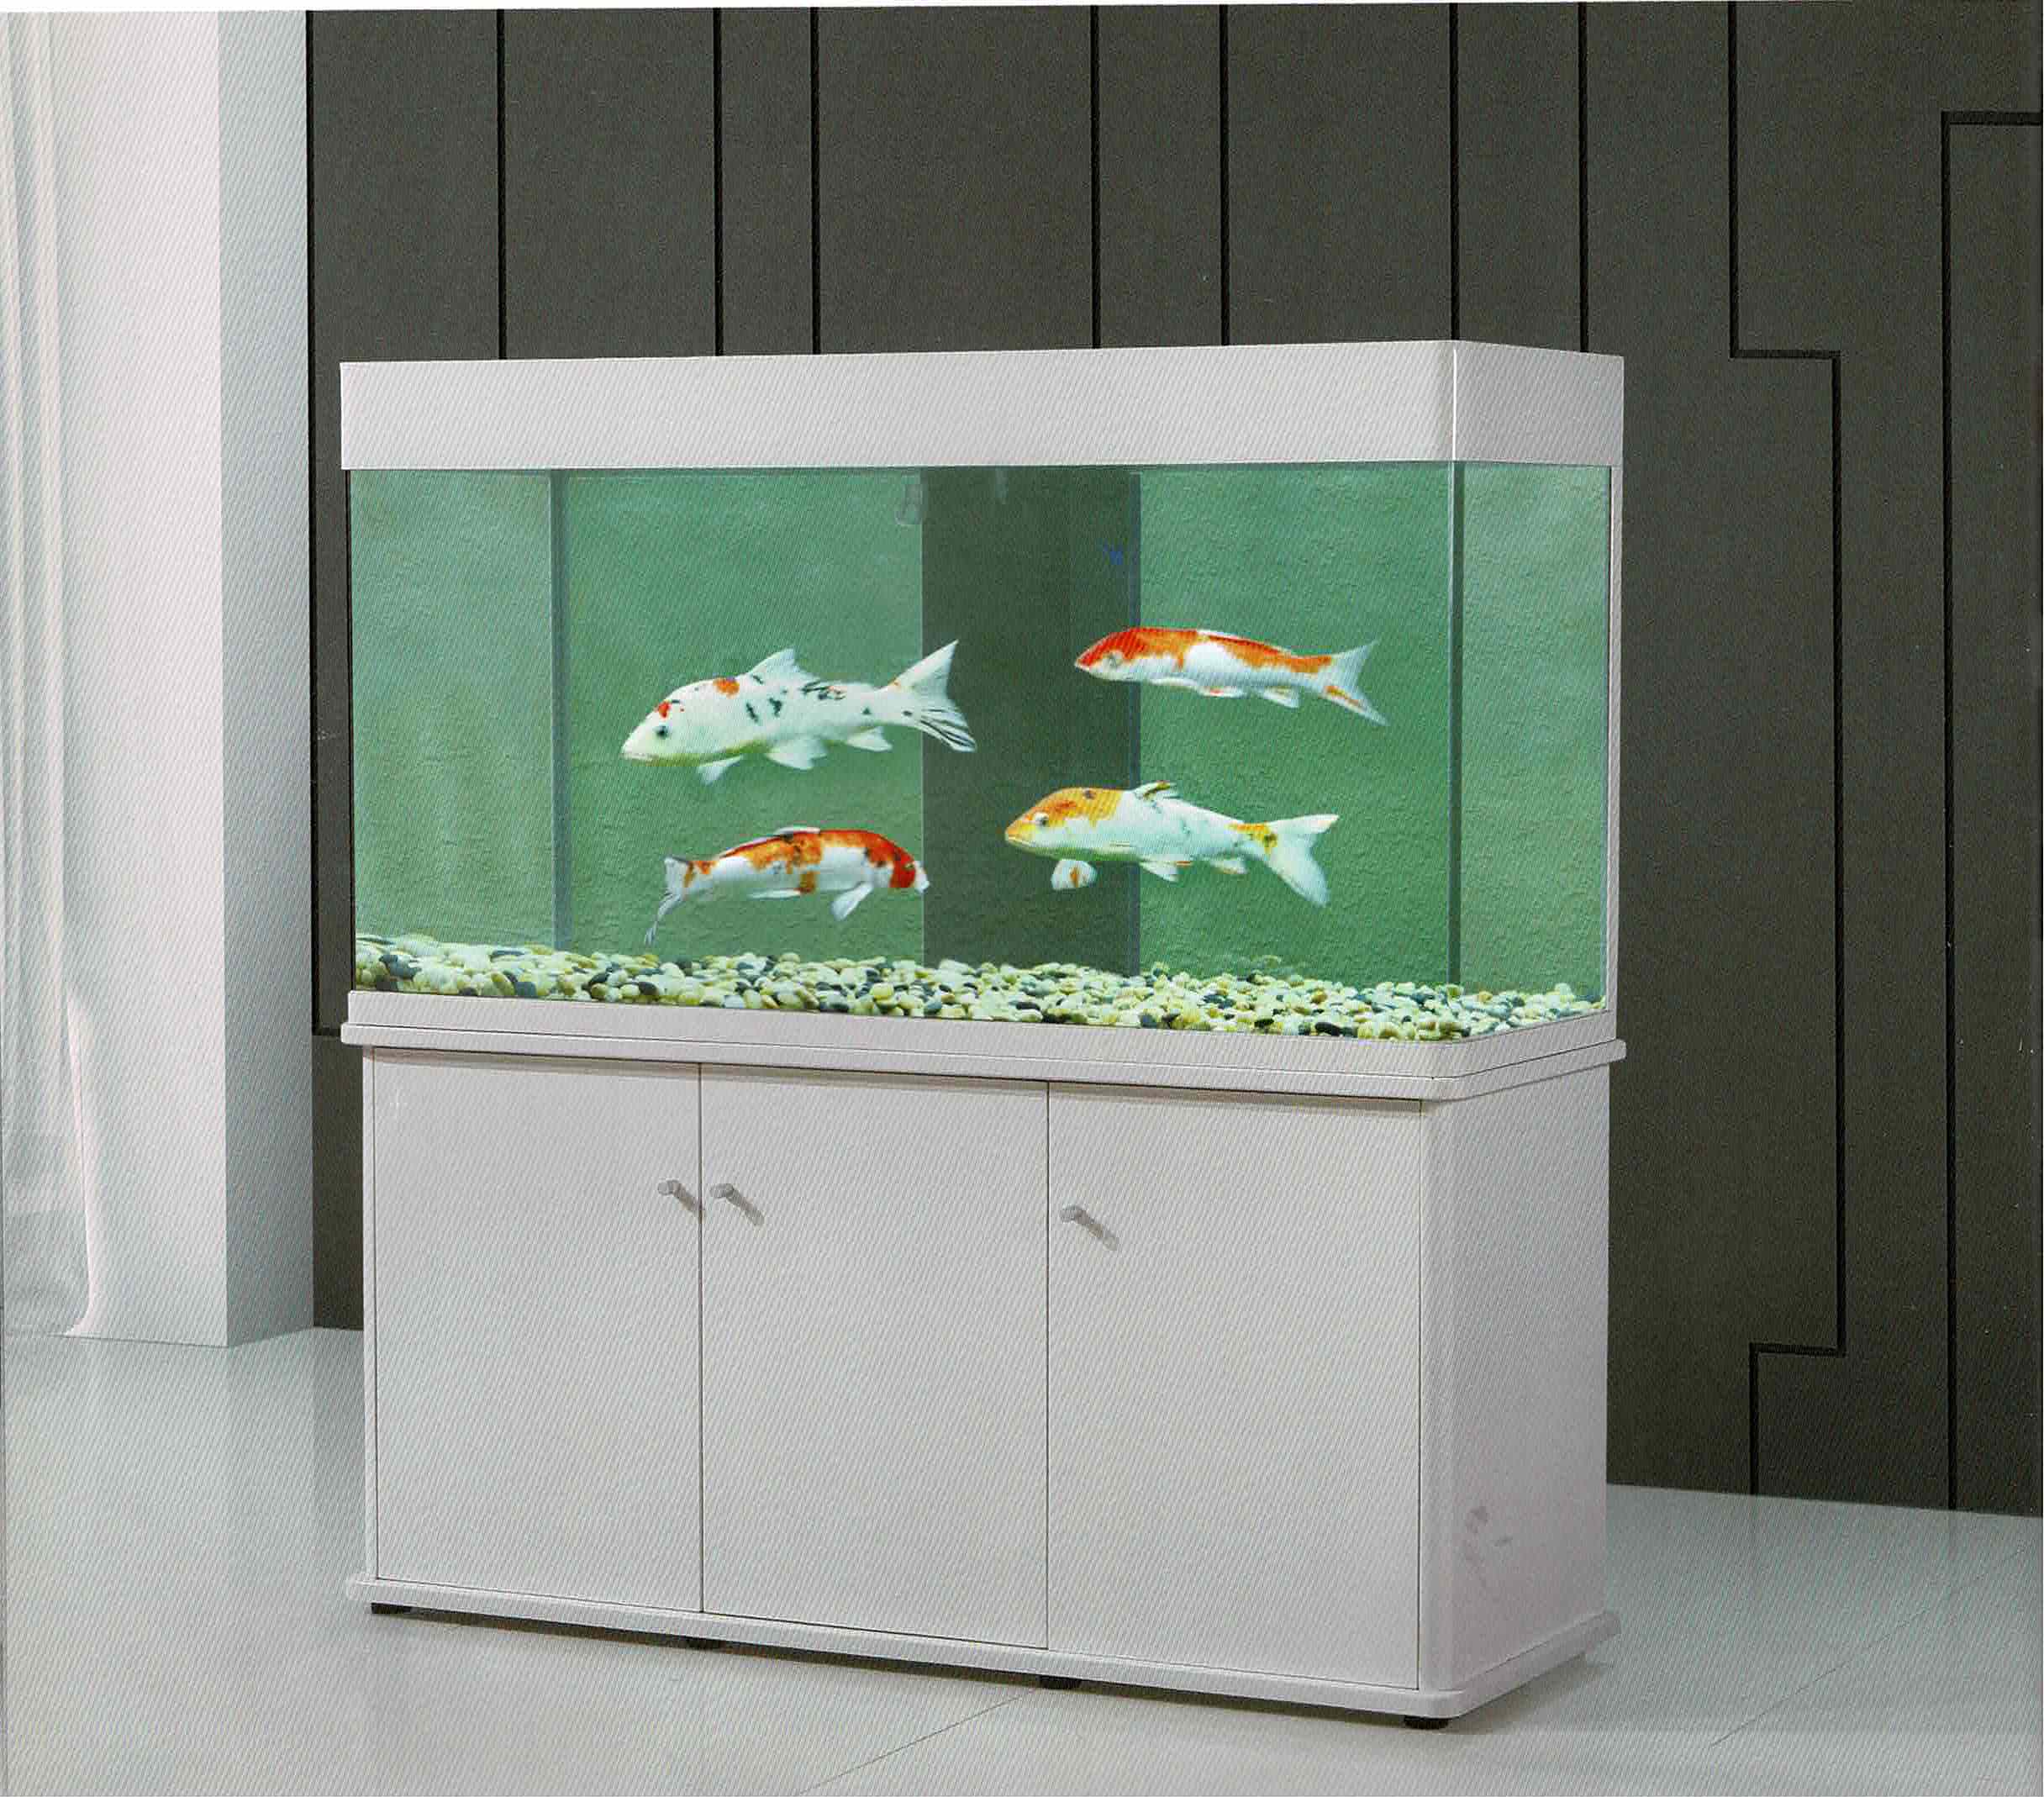 Oceanson R200 - 200cm Aquarium with Curved Corners and Cabinet with Sump